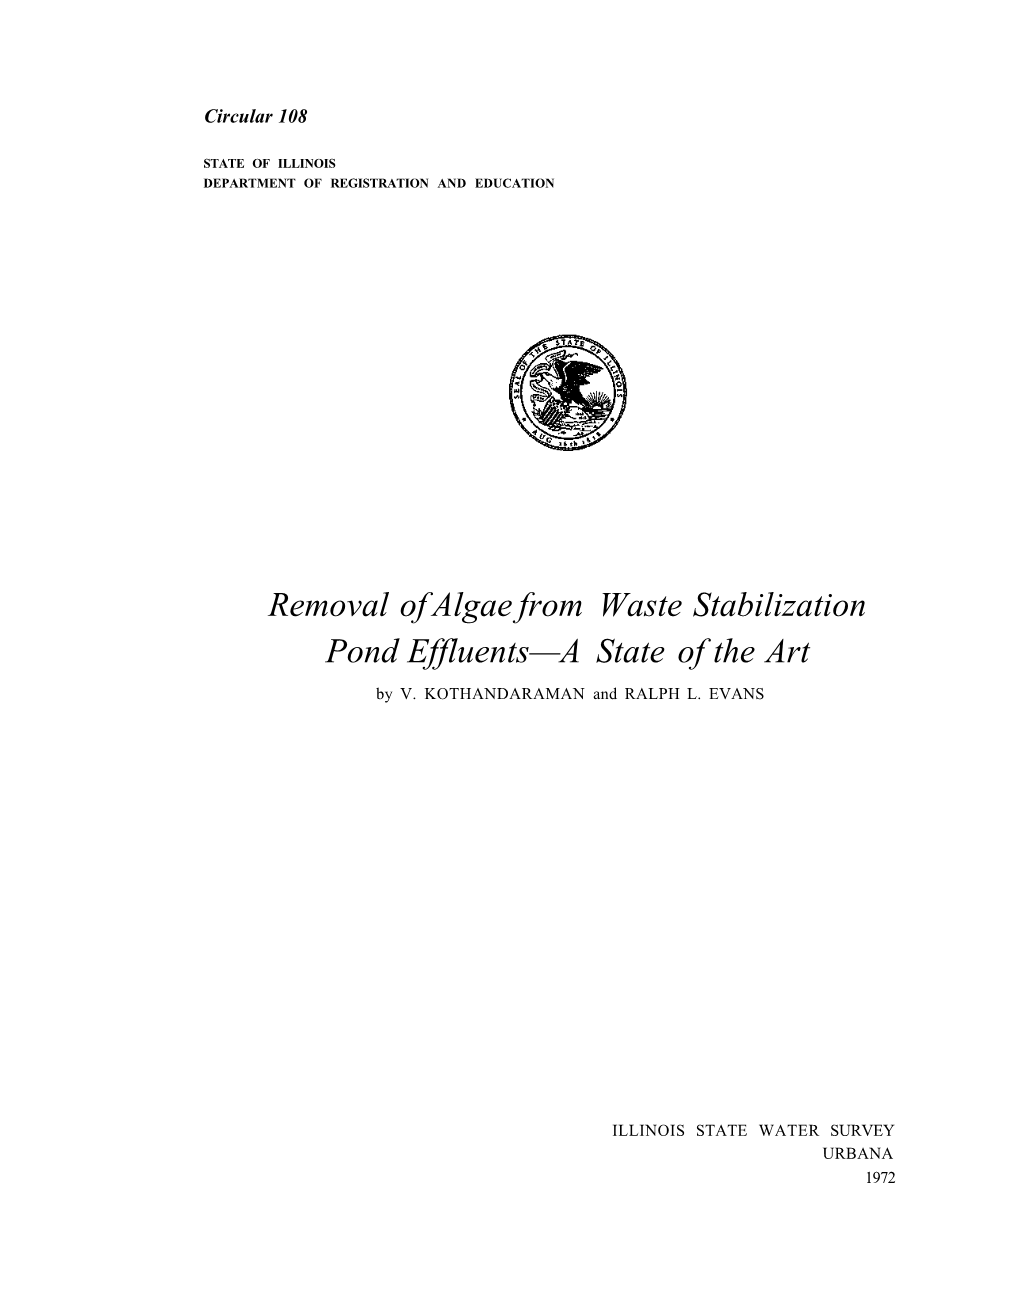 Removal of Algae from Waste Stabilization Pond Effluents—A State of the Art by V